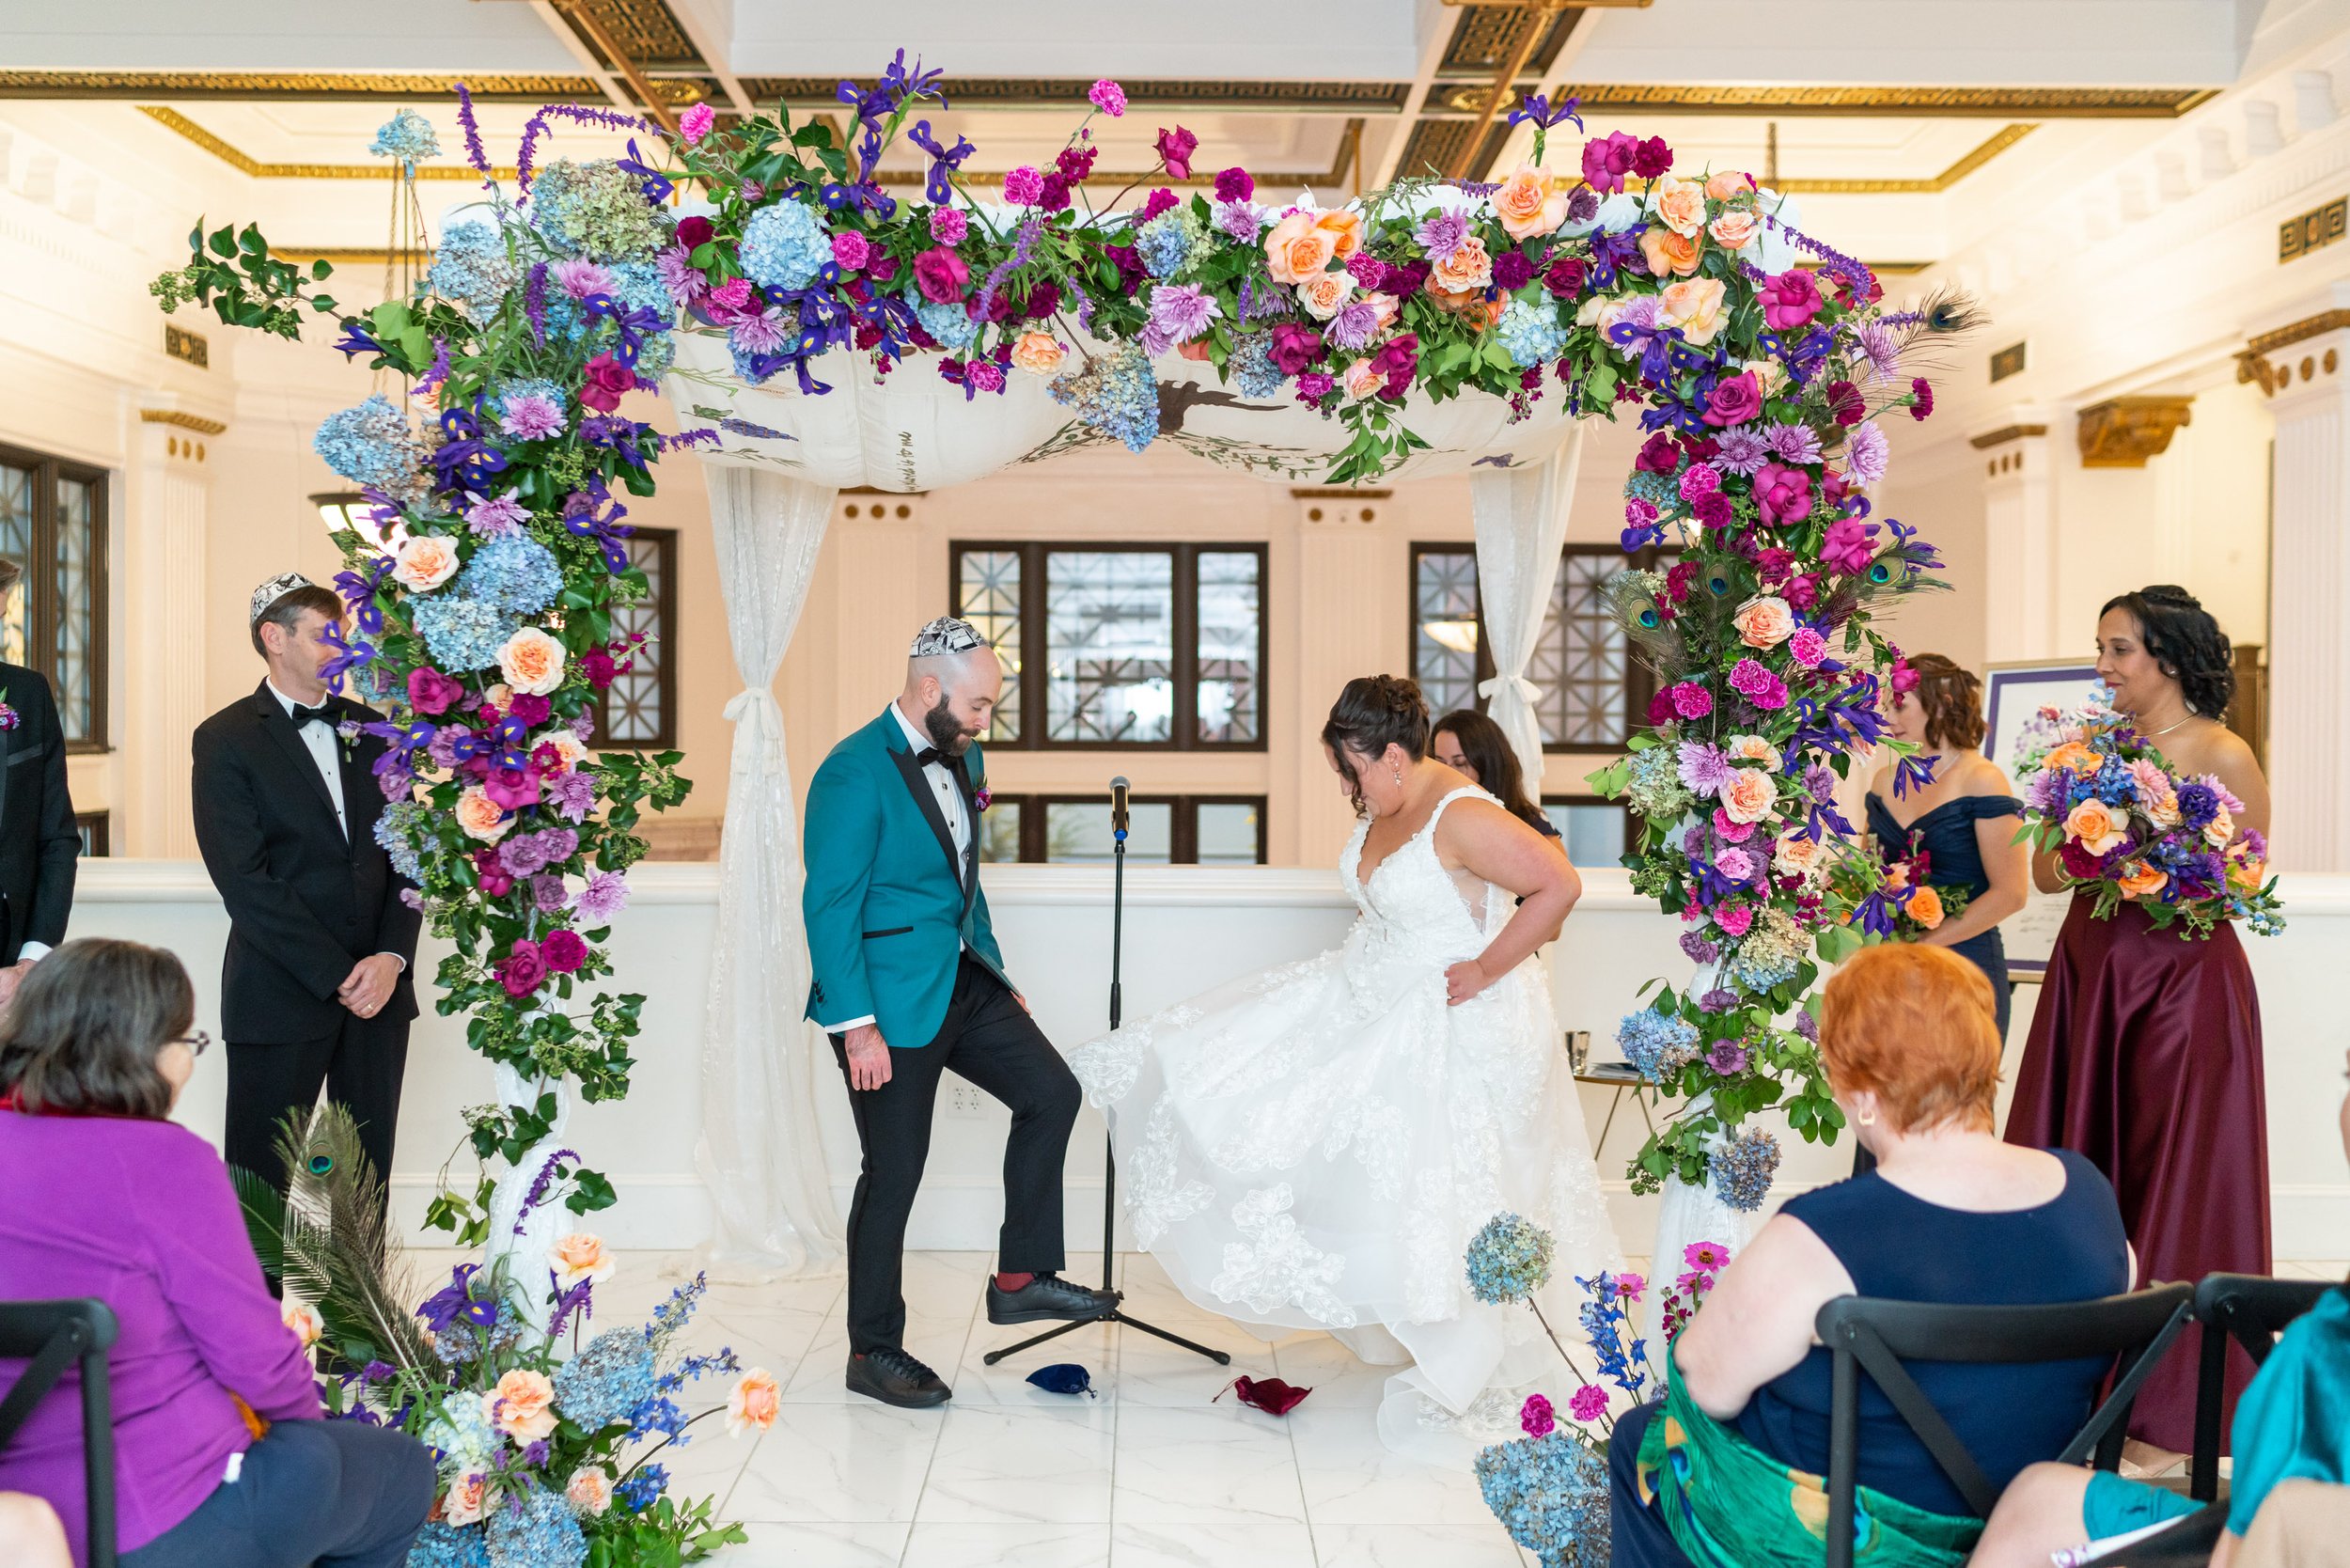 Amazing floral chuppah at colorful wedding in Frederick md